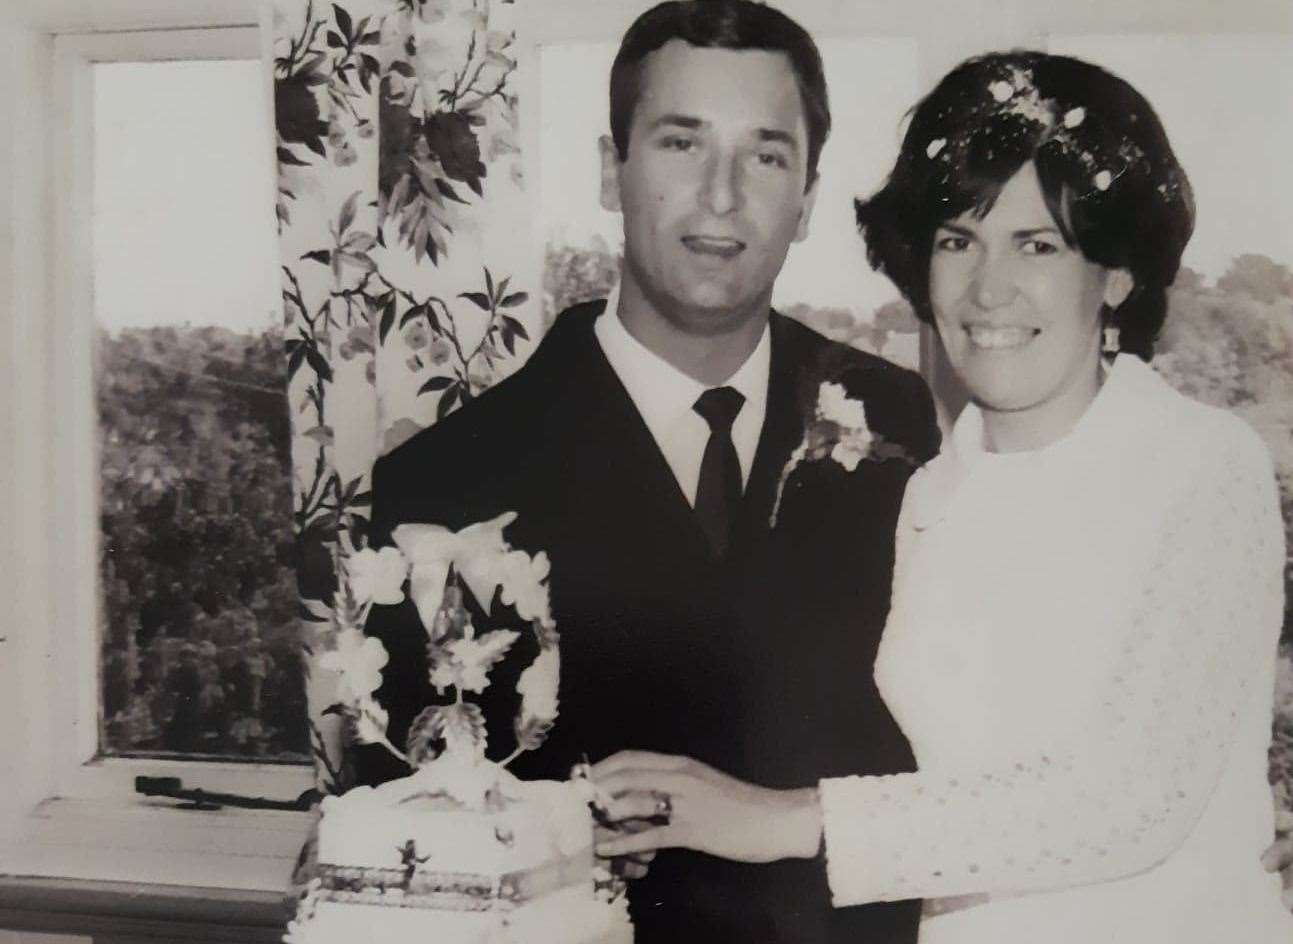 Mr and Mrs Relf cutting their wedding cake on August 30, 1969